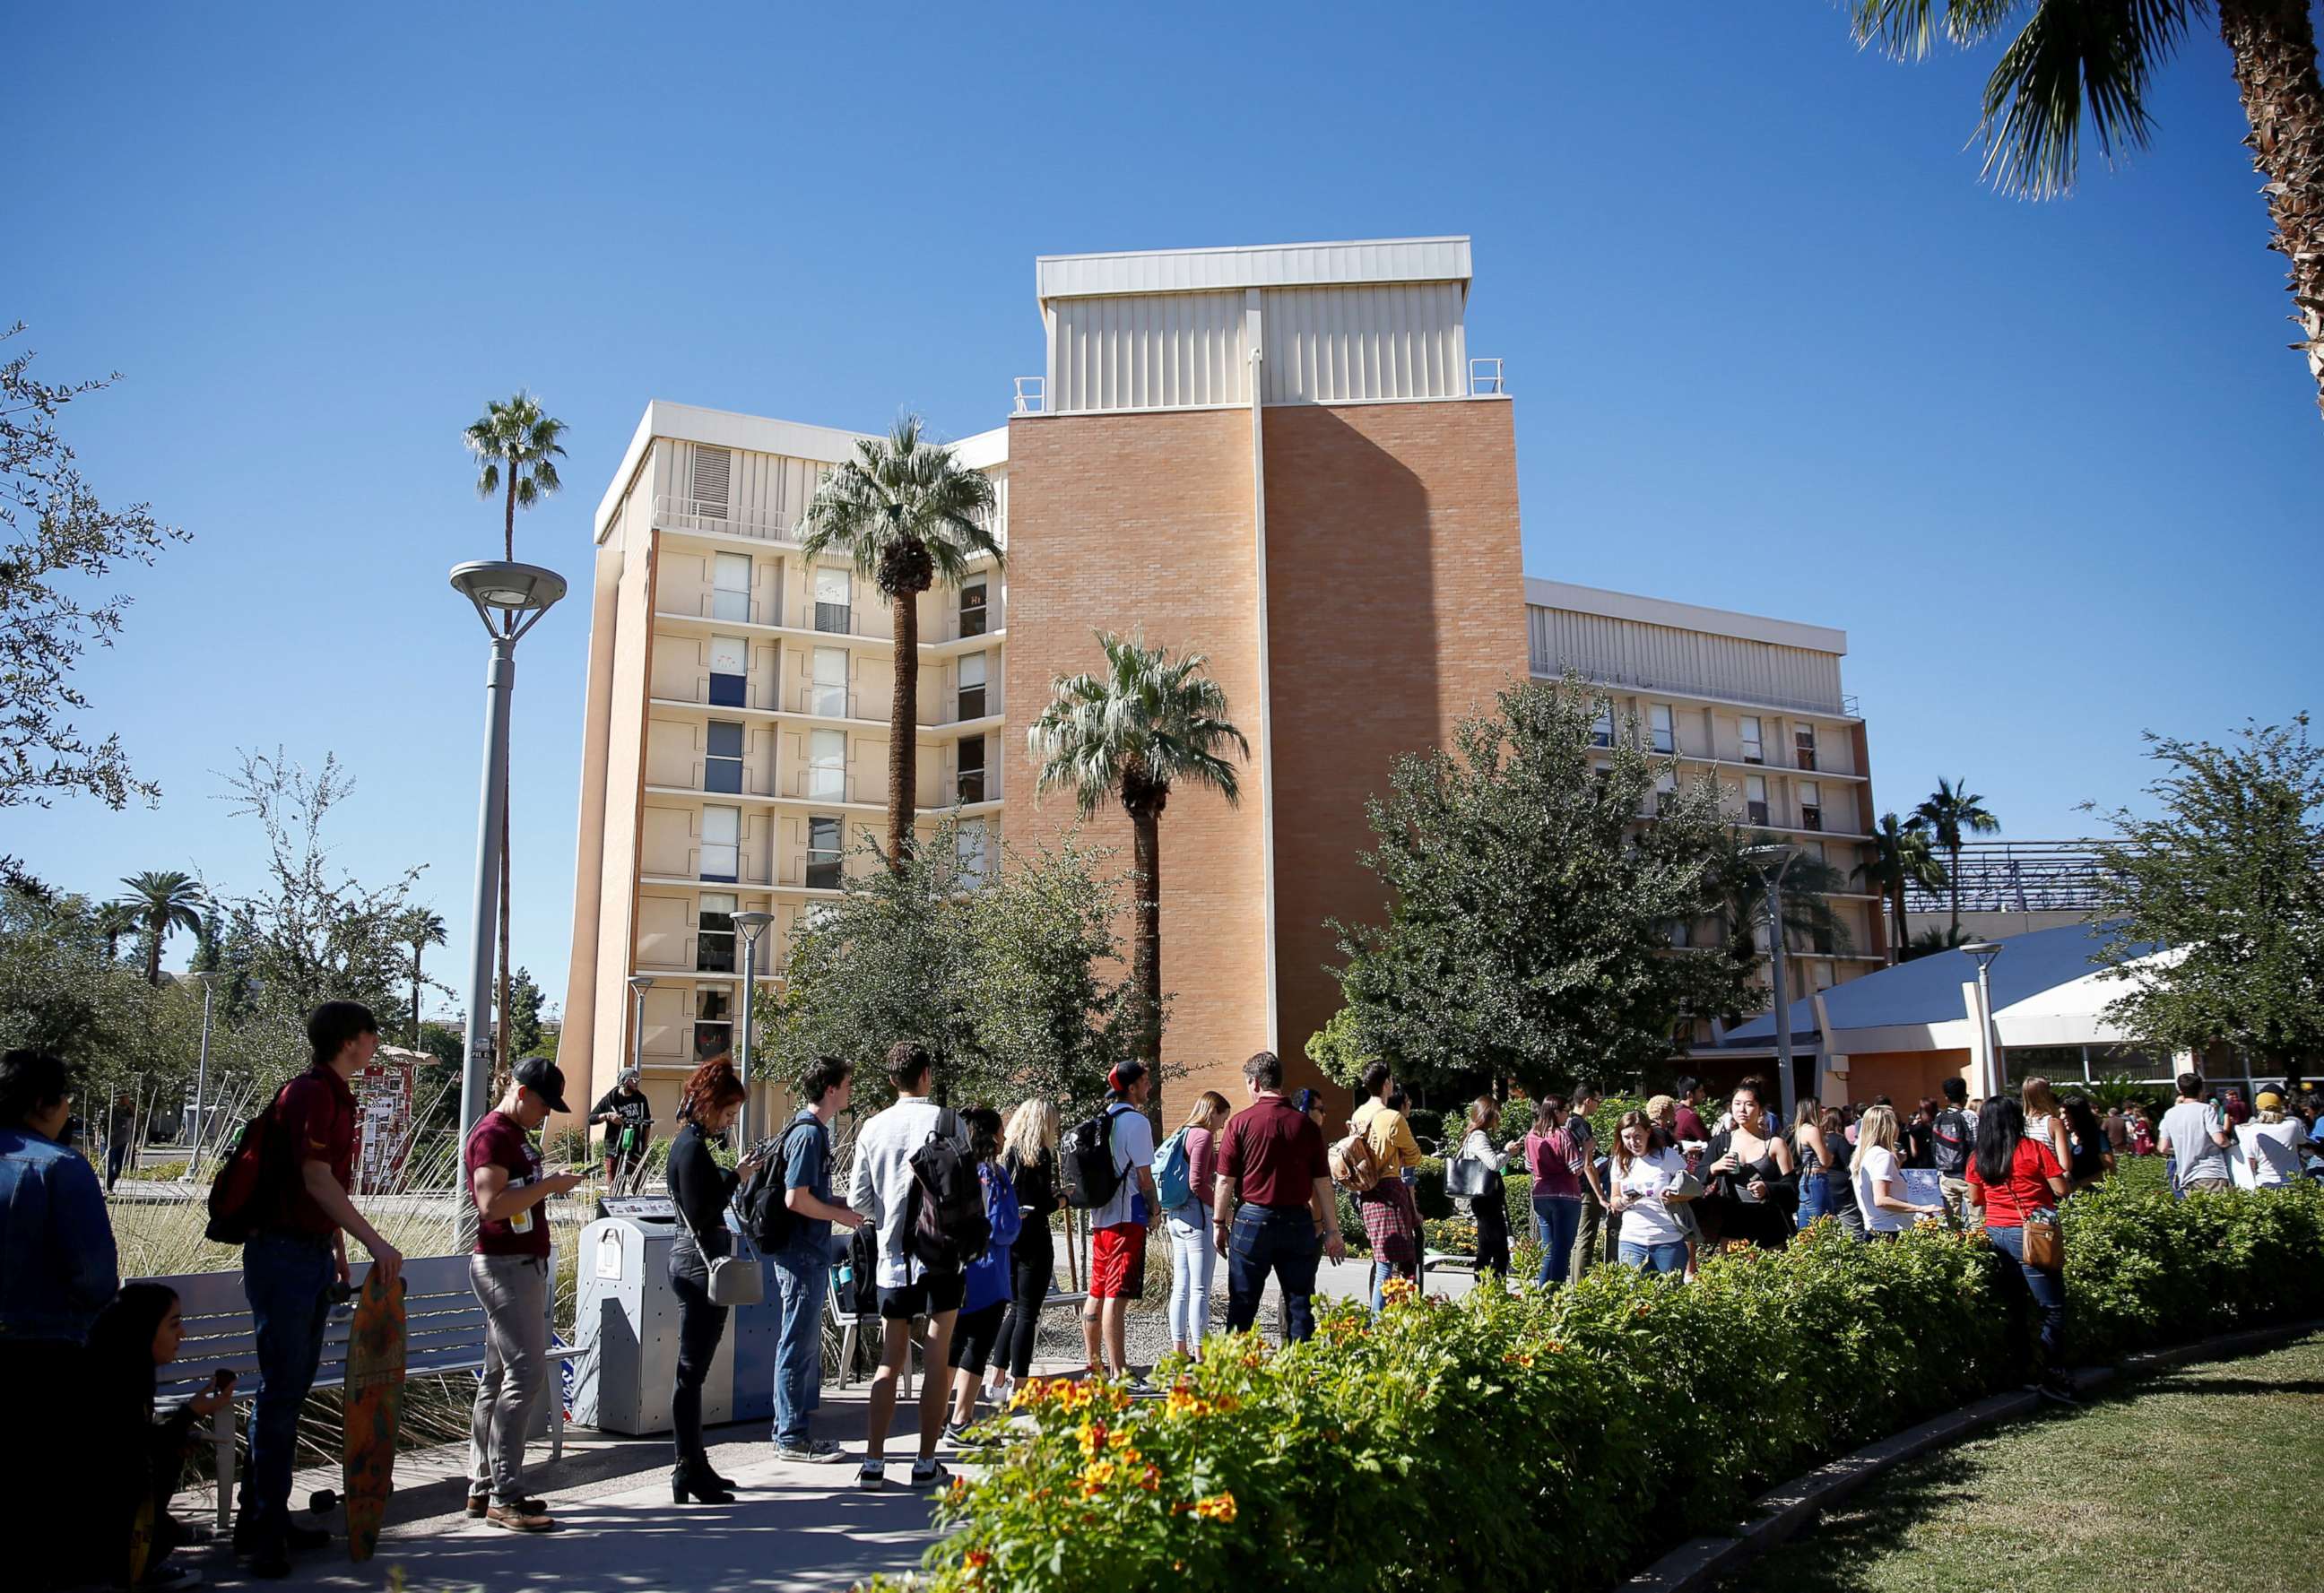 PHOTO: People line up to vote at the ASU Palo Verde West polling station during the U.S. midterm elections in Tempe, Arizona, Nov. 6, 2018.